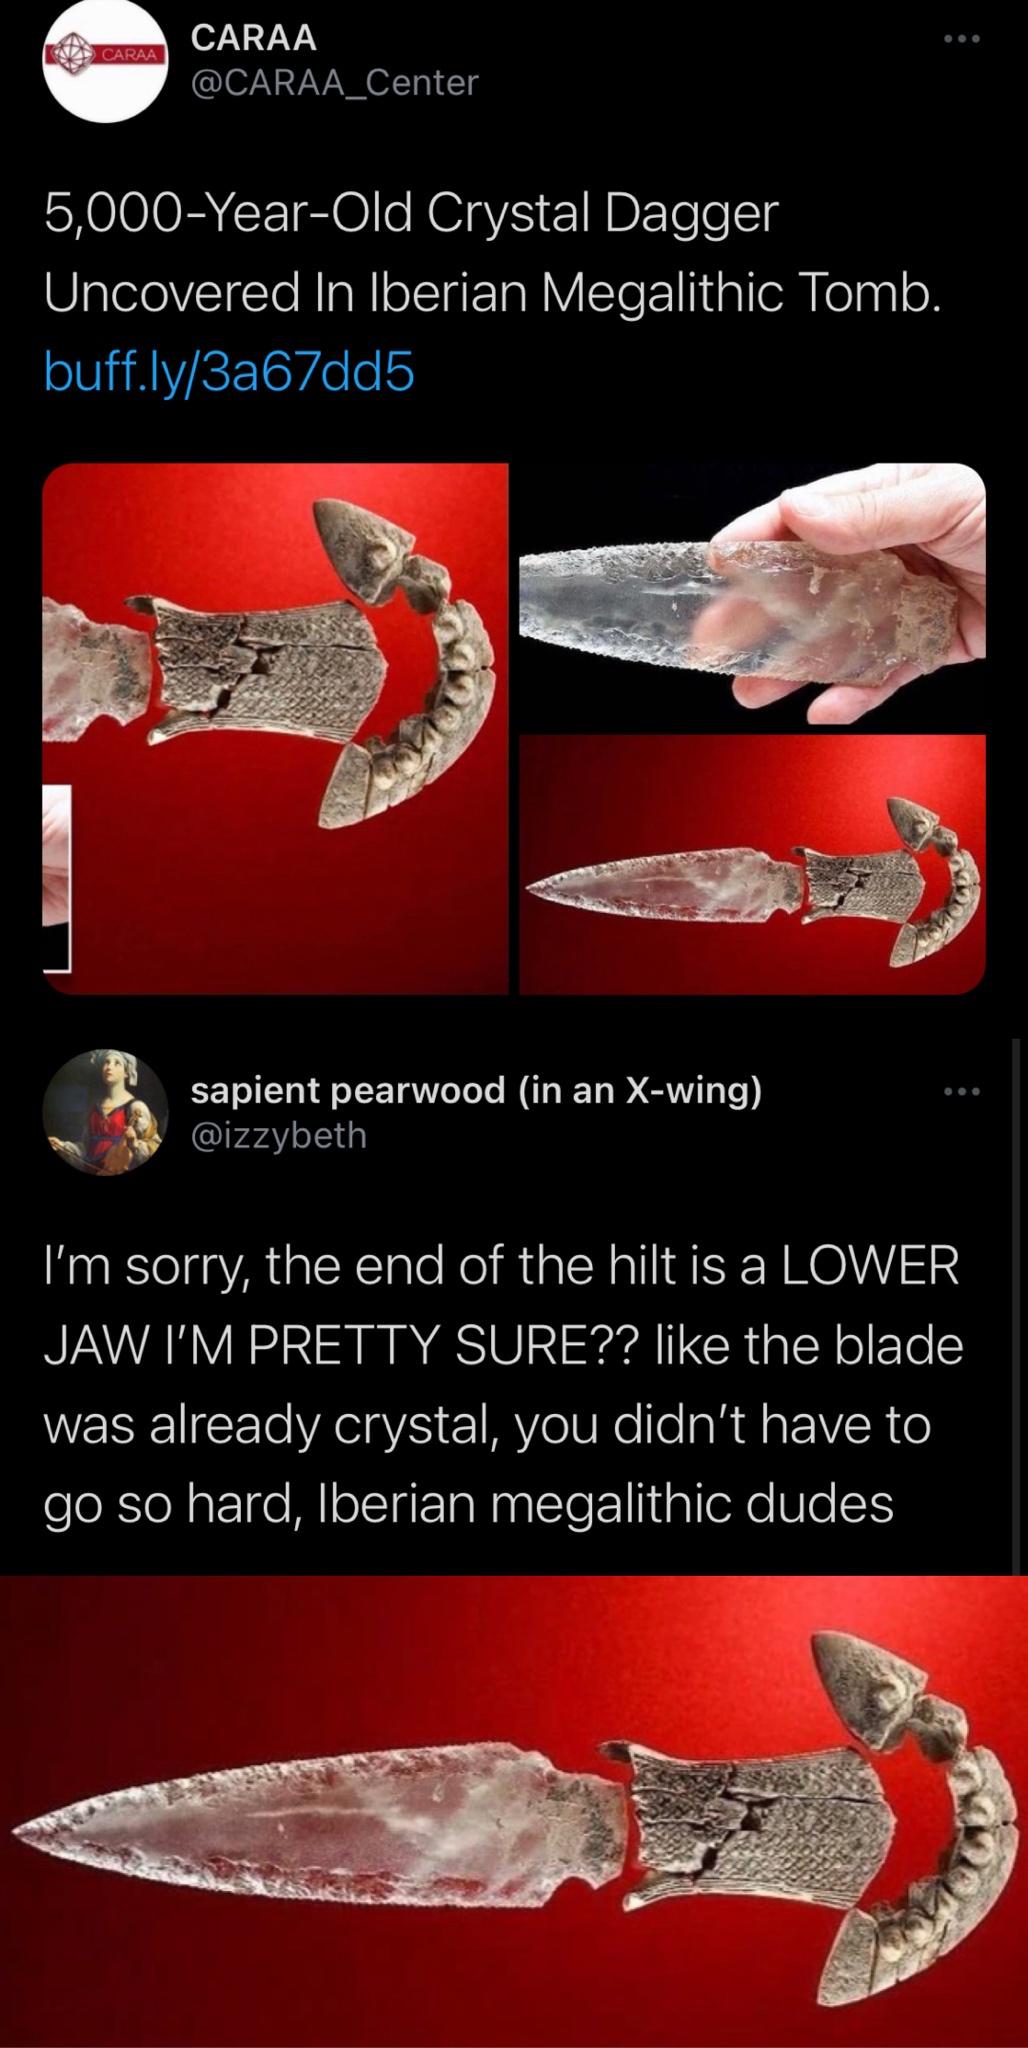 funny memes and pics - poster - Caraa Caraa 5,000YearOld Crystal Dagger Uncovered In Iberian Megalithic Tomb. buff.ly3a67dd5 sapient pearwood in an Xwing I'm sorry, the end of the hilt is a Lower Jaw I'M Pretty Sure?? the blade was already crystal, you di